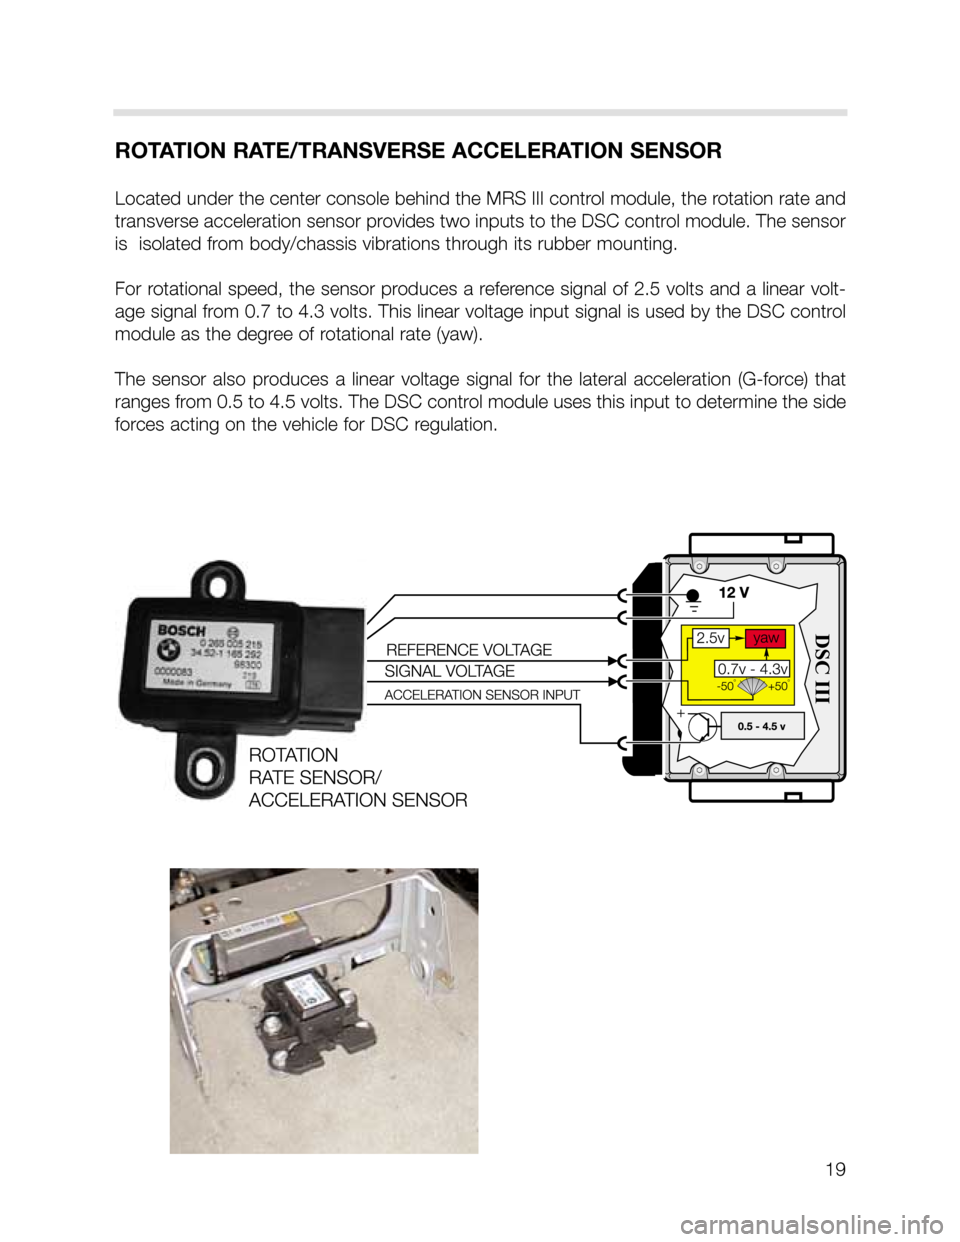 BMW X5 2004 E53 DSC System Workshop Manual 19
ROTATION RATE/TRANSVERSE ACCELERATION SENSOR
Located under the center console behind the MRS III control module, the rotation rate and
transverse acceleration sensor provides two inputs to the DSC 